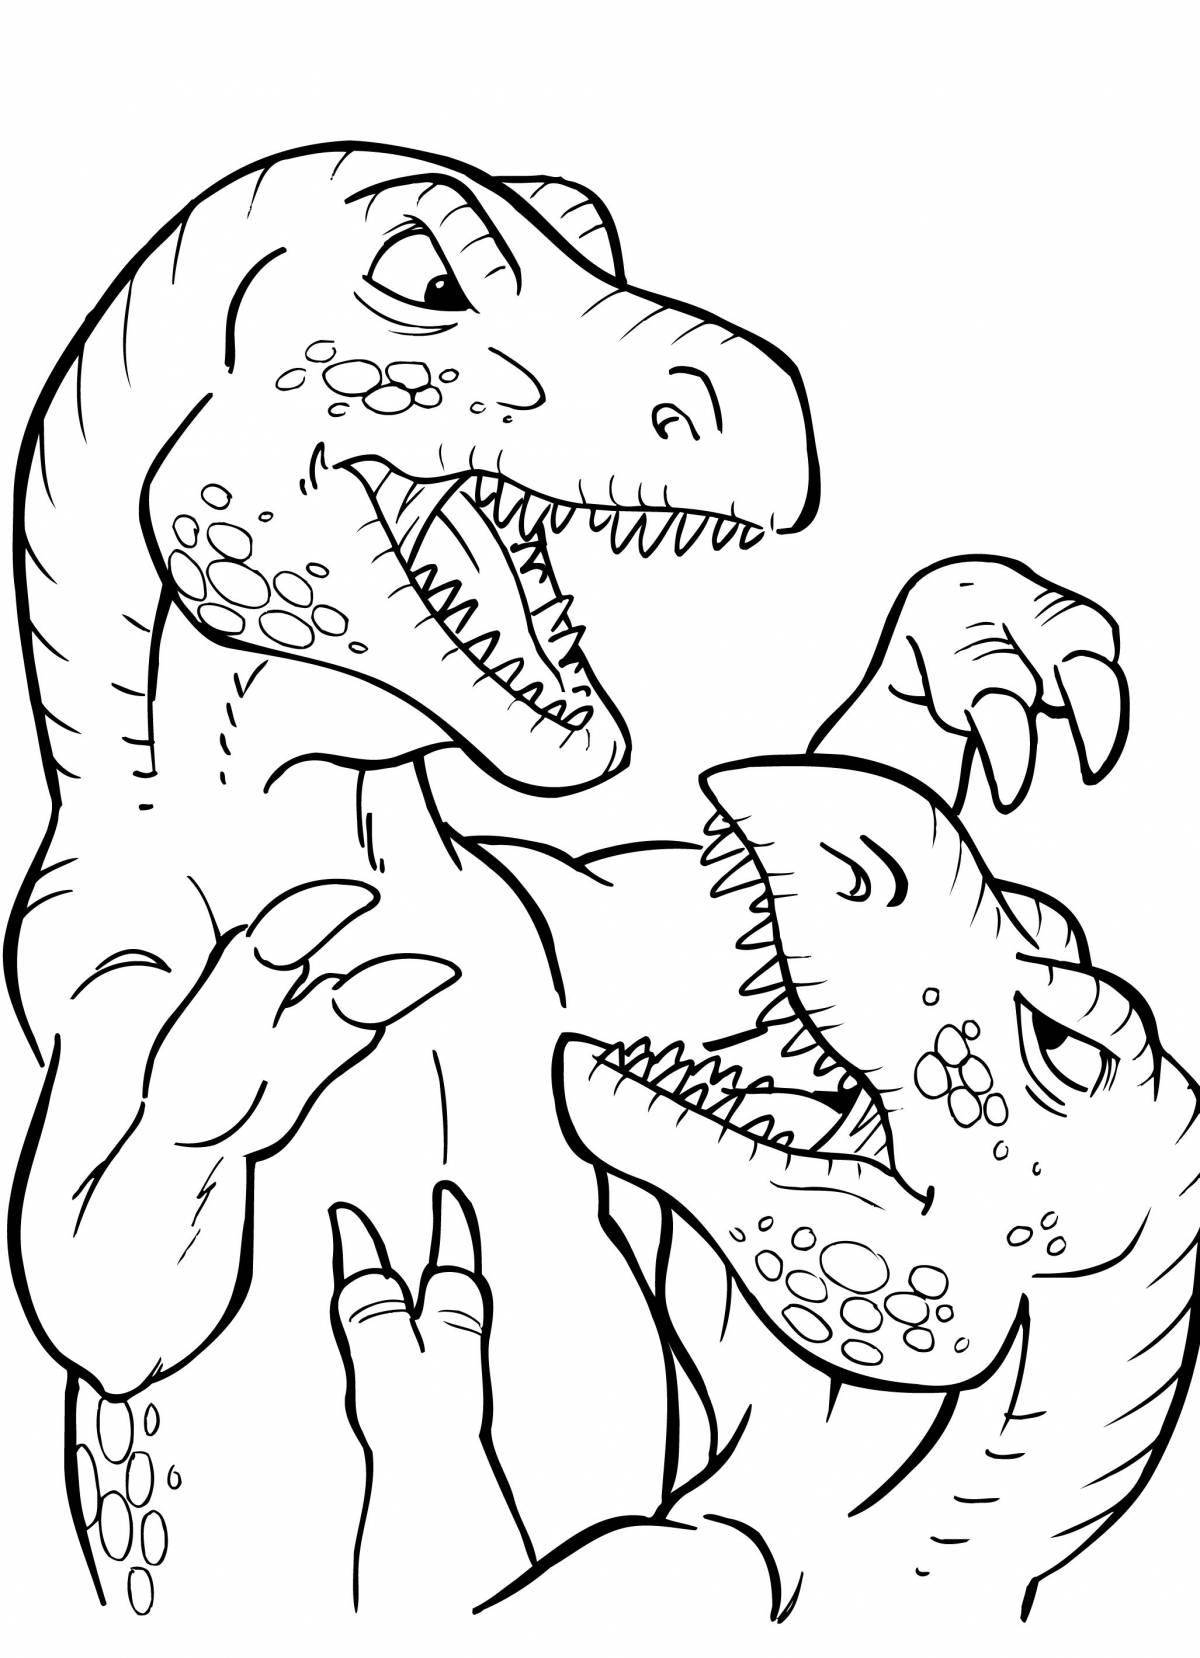 Playful t-rex coloring page